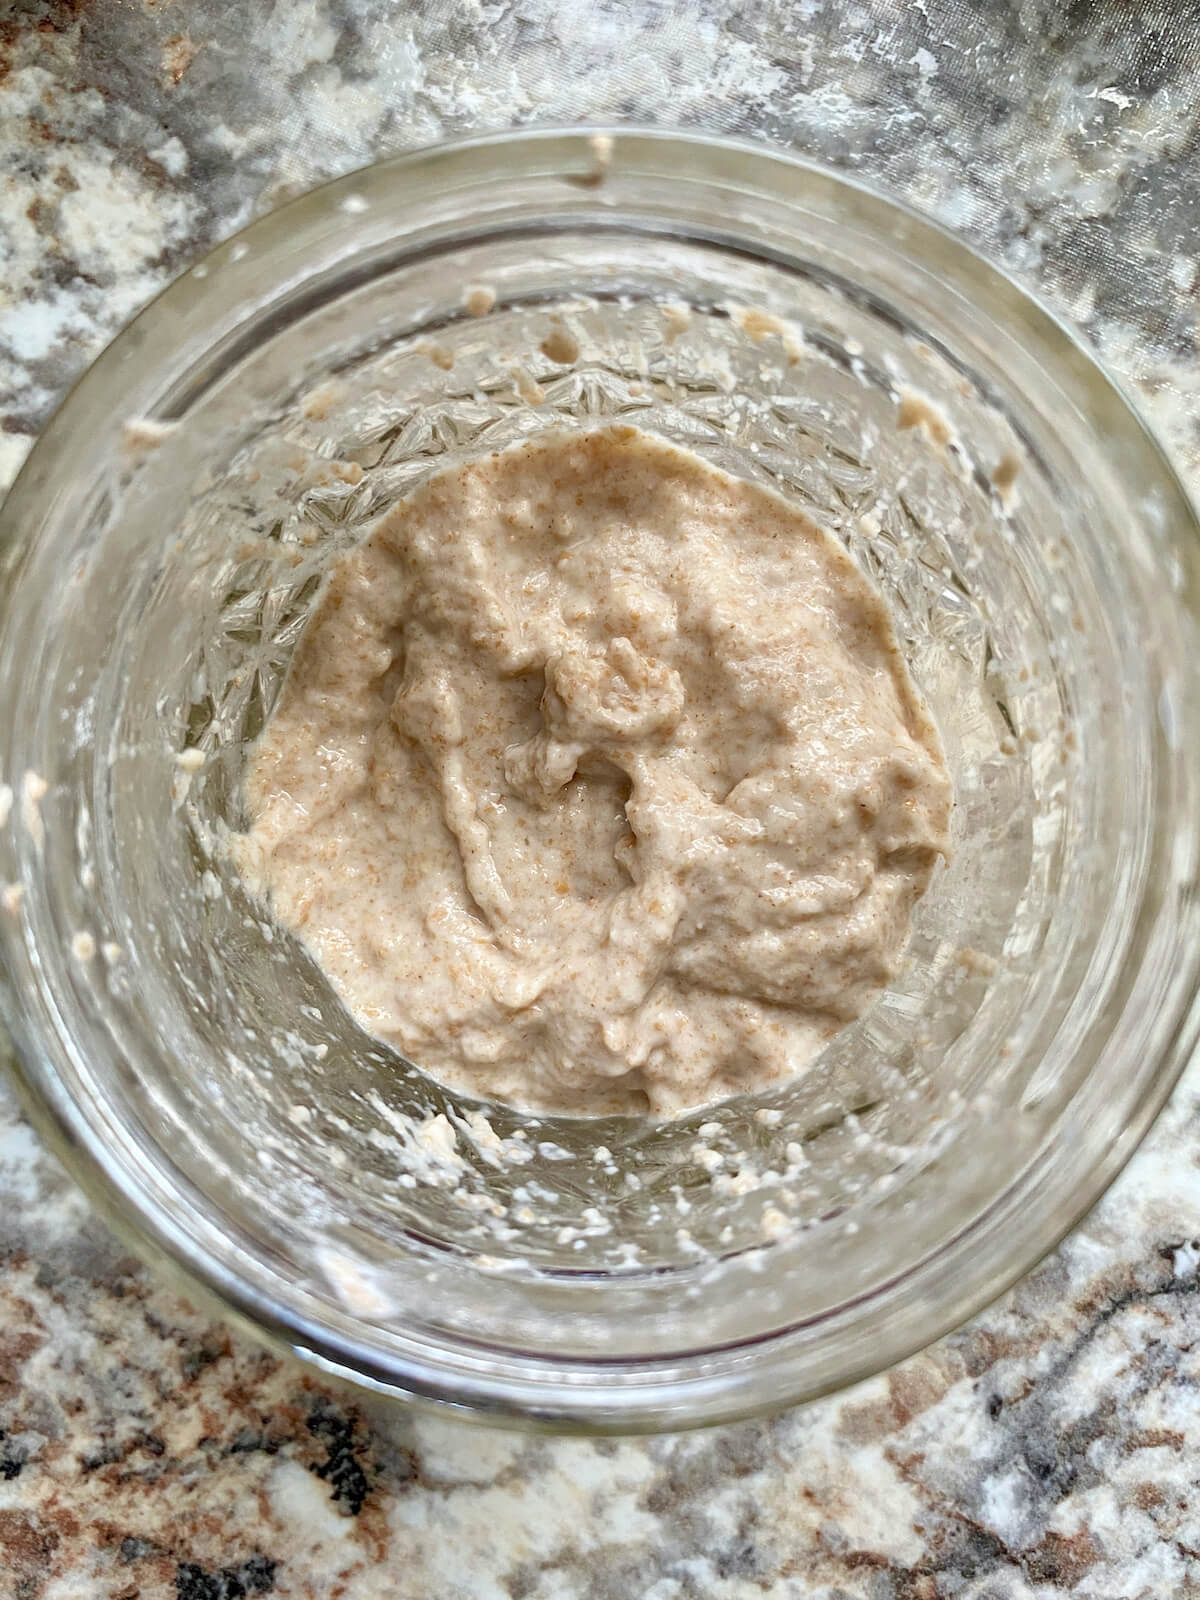 Sourdough starter in a small glass jar after being fed.